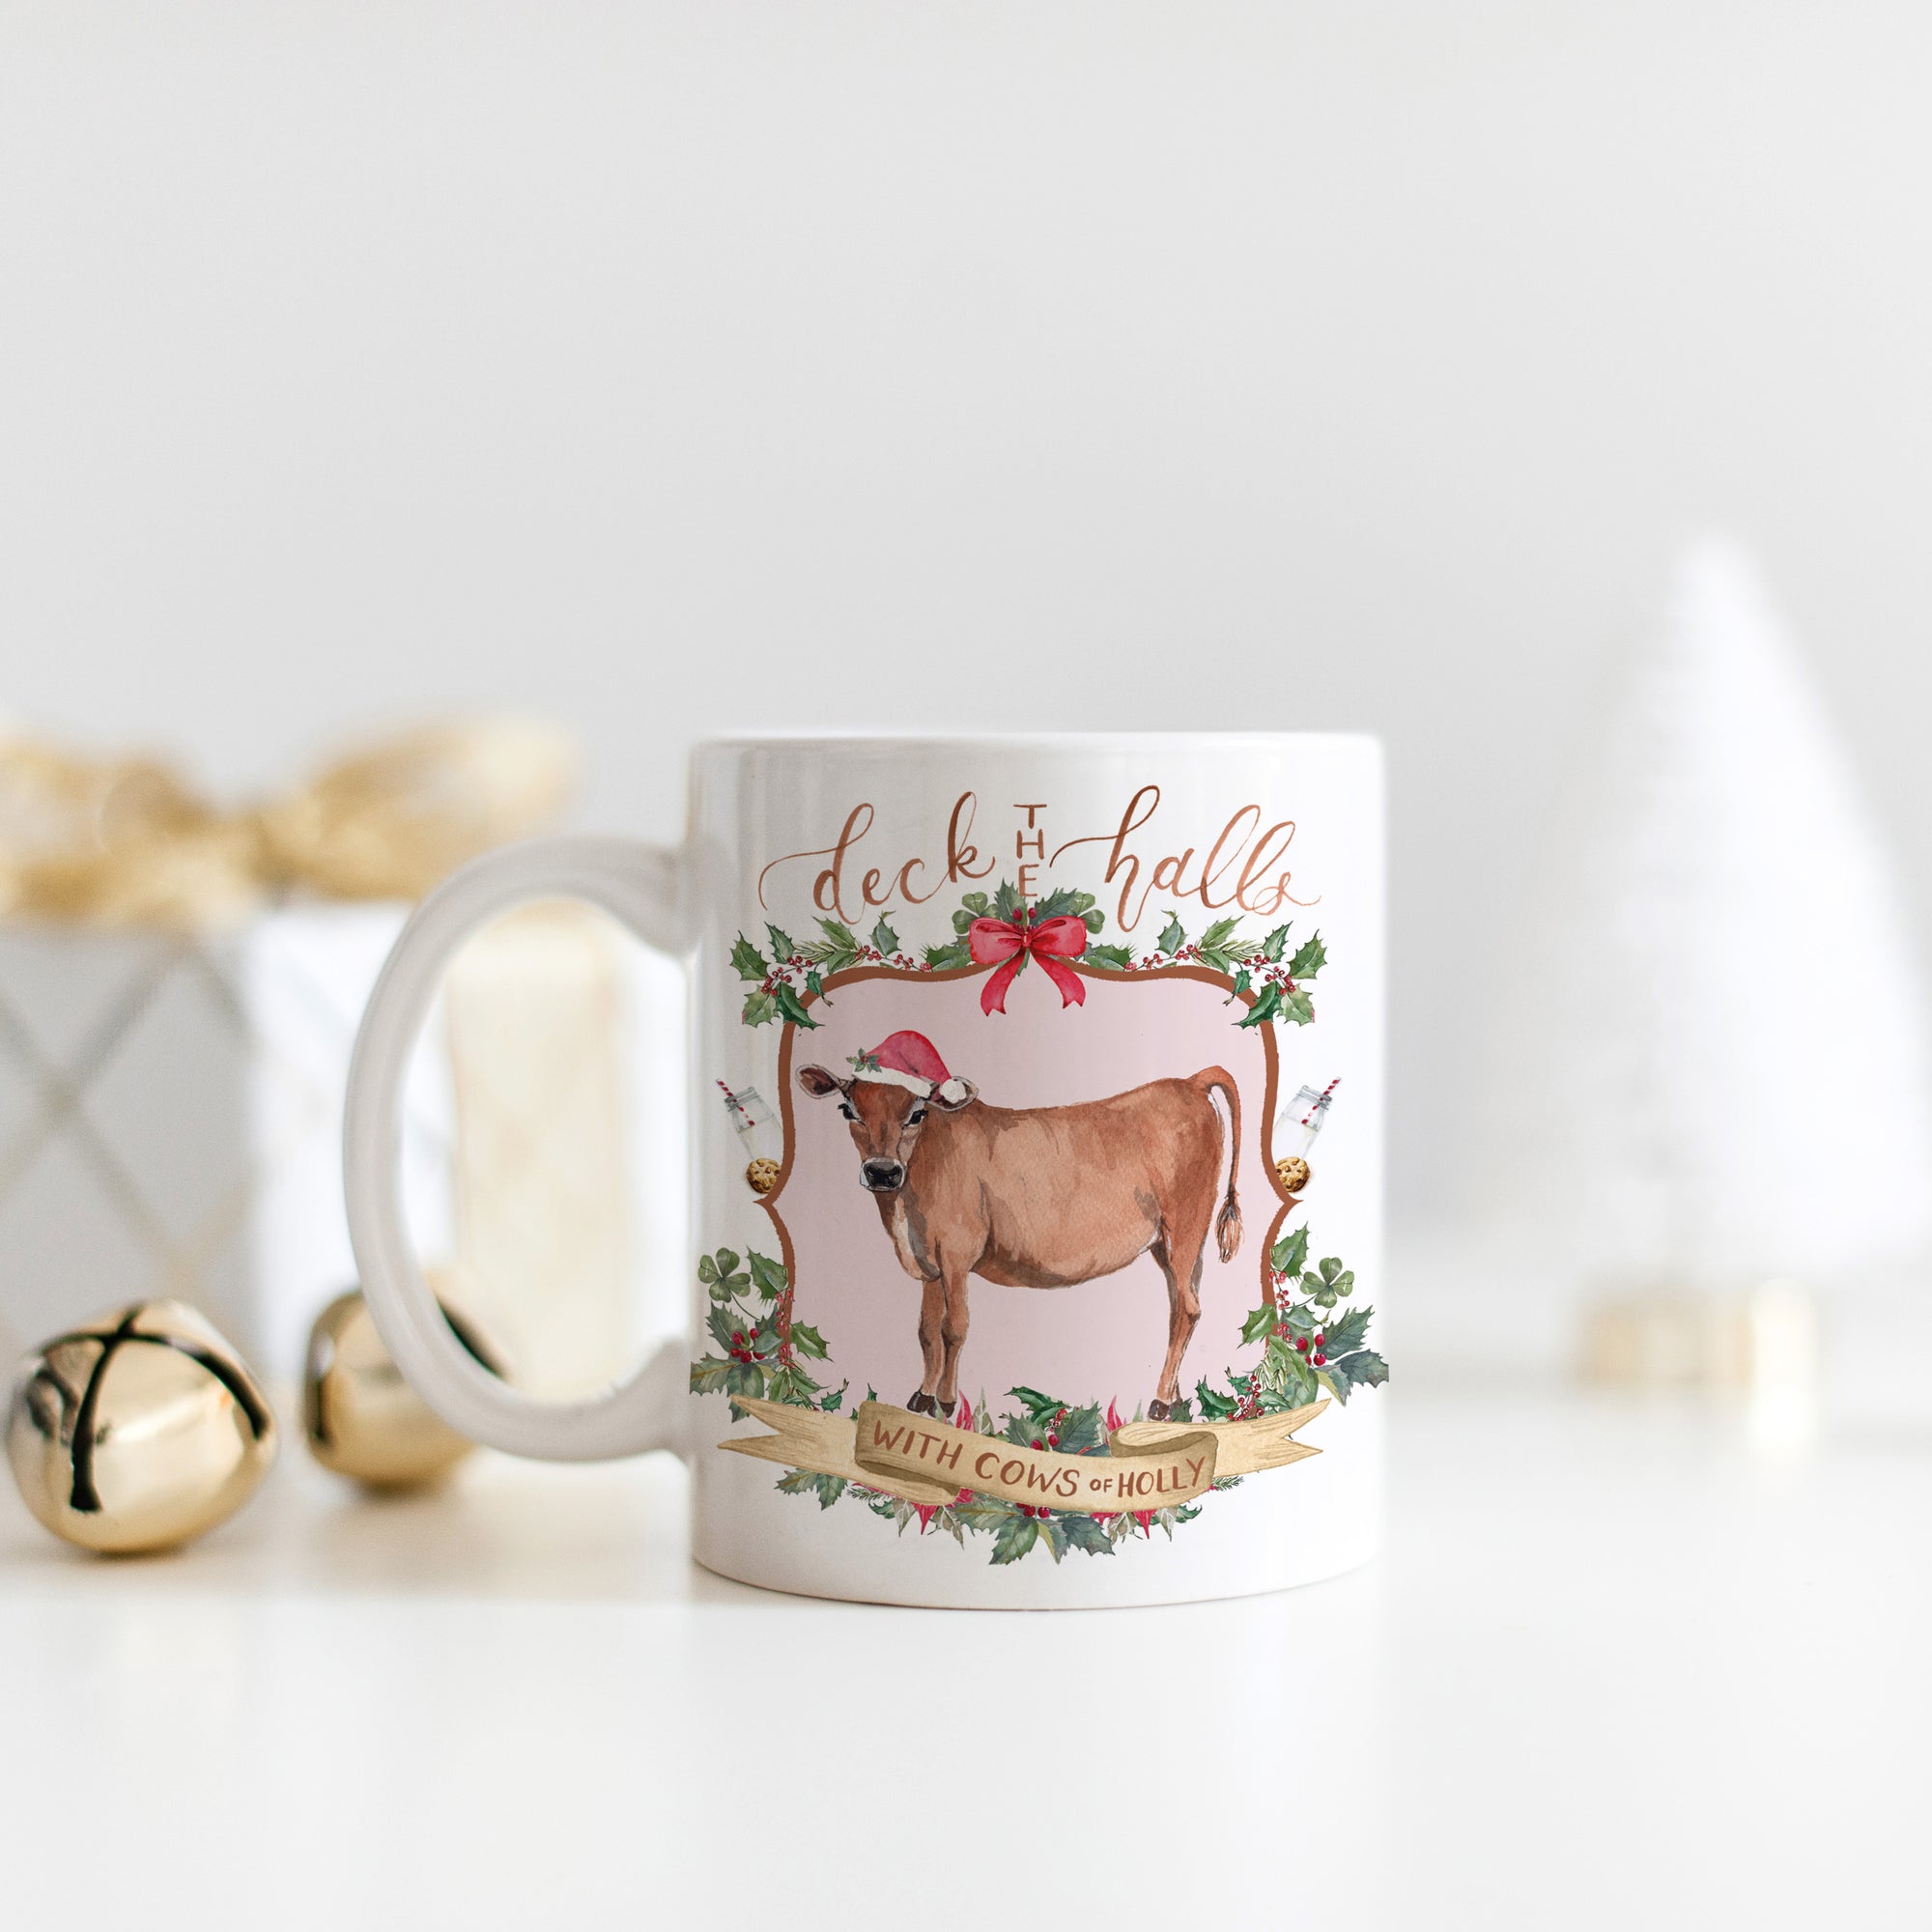 Deck the Halls with Cows of Holly Mug